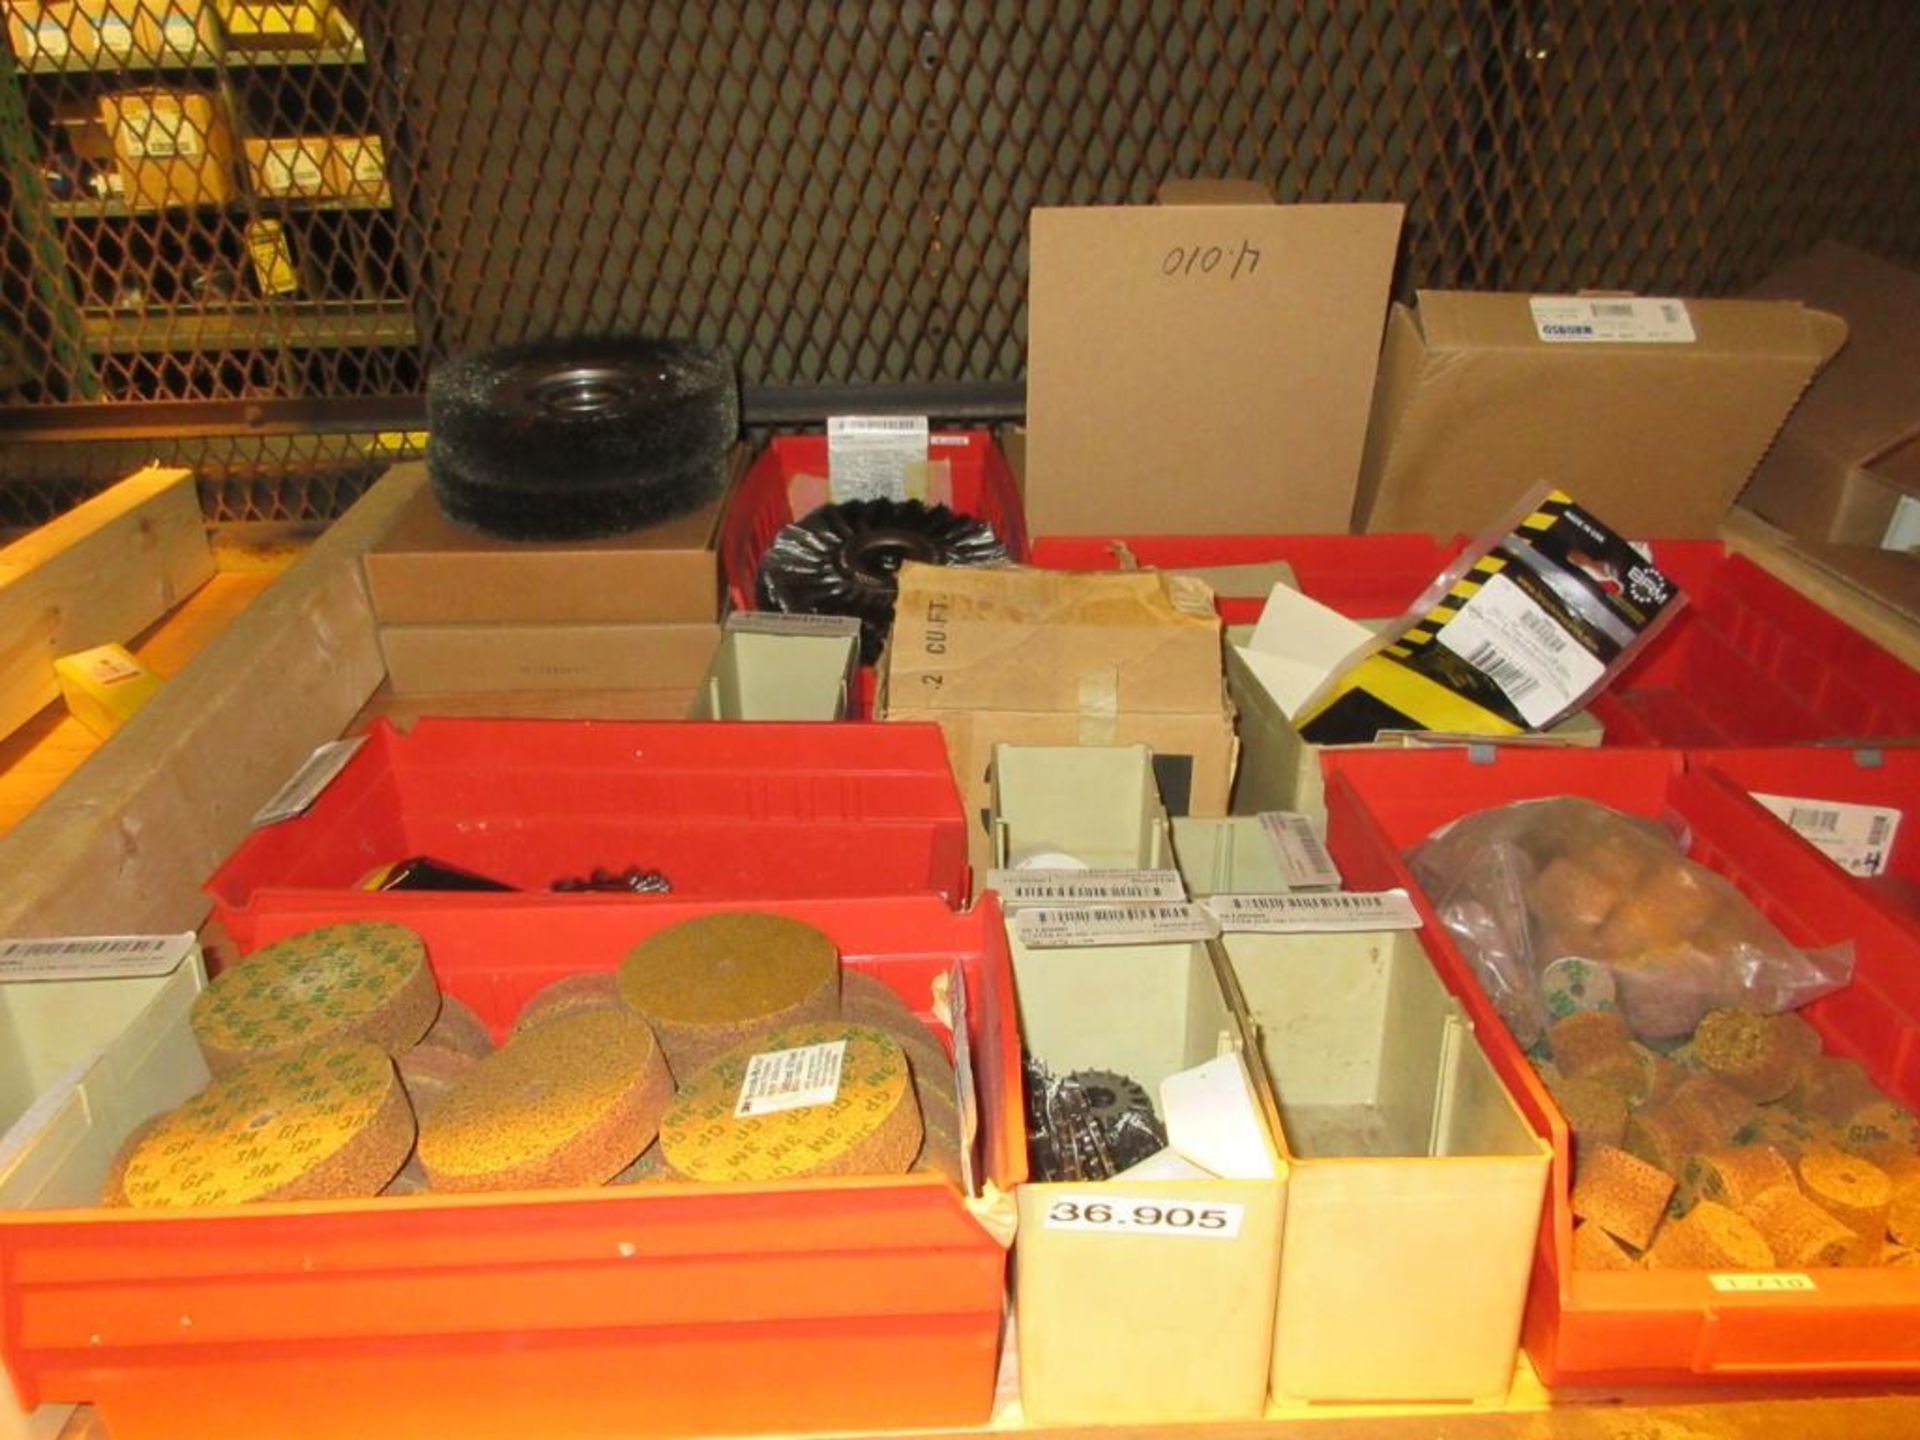 CONTENTS OF (22) SECTIONS PALLET RACK: ASSORTED ABRASIVES, SUNNEN STONES, TOOL BITS, DOVETAIL CUTTER - Image 11 of 43